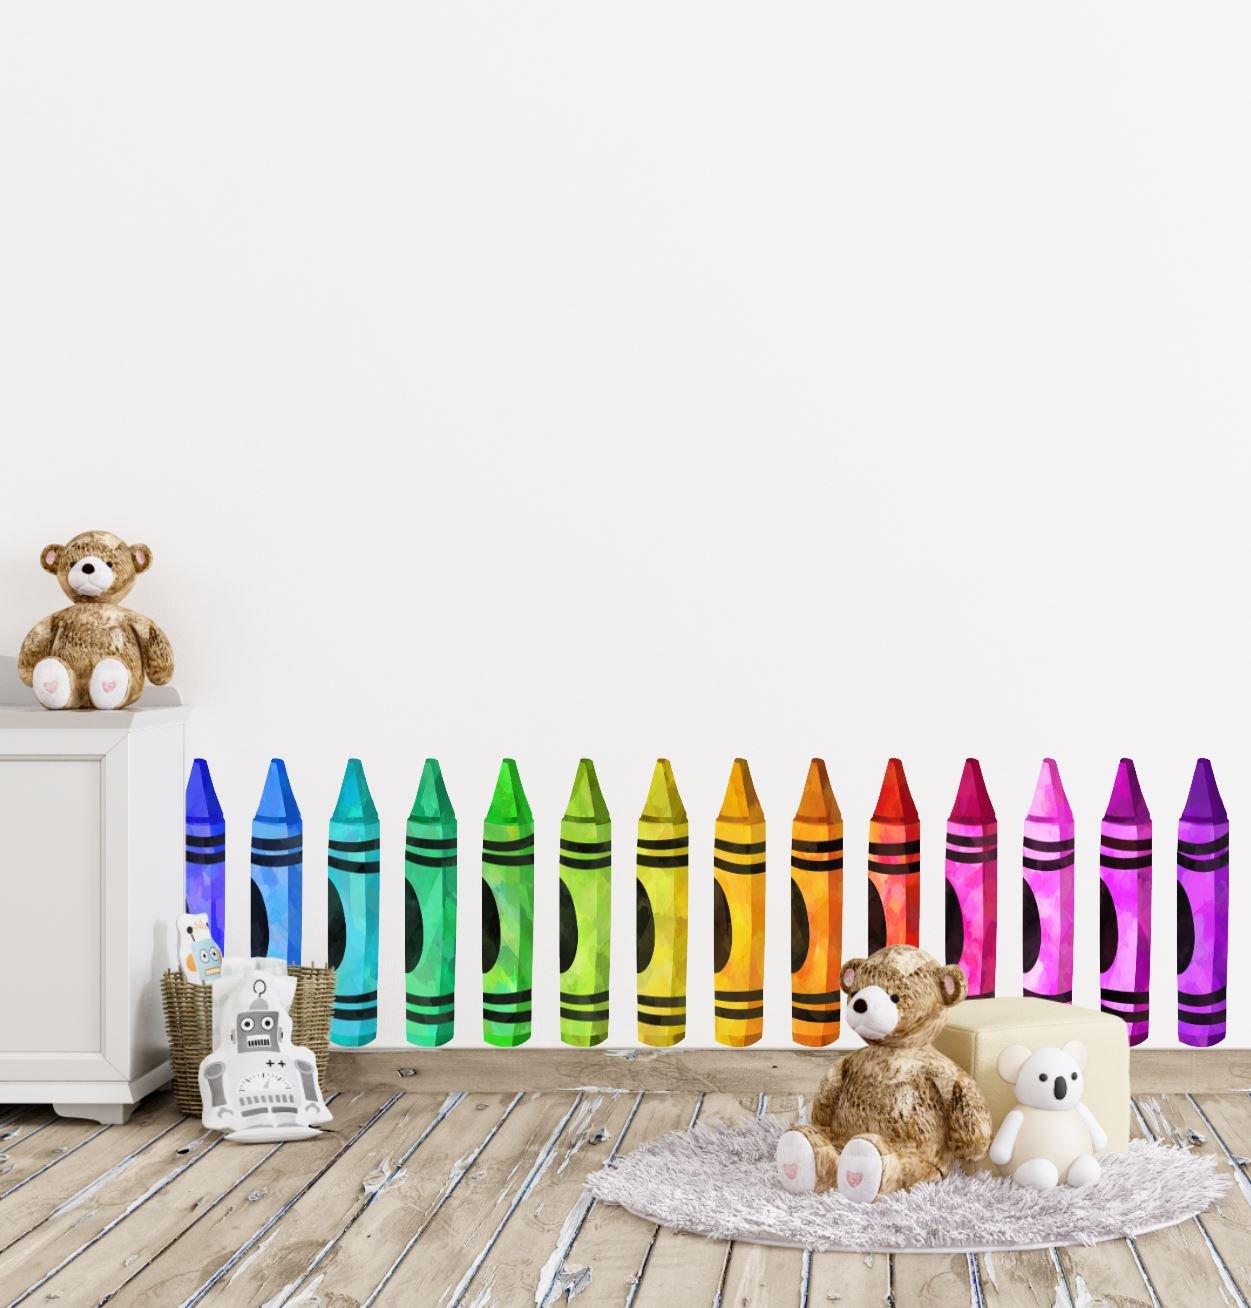 Crayon Wall Decals | Muted Rainbow Color Crayon Wall Stickers - Home Decor Decals - Picture Perfect Decals